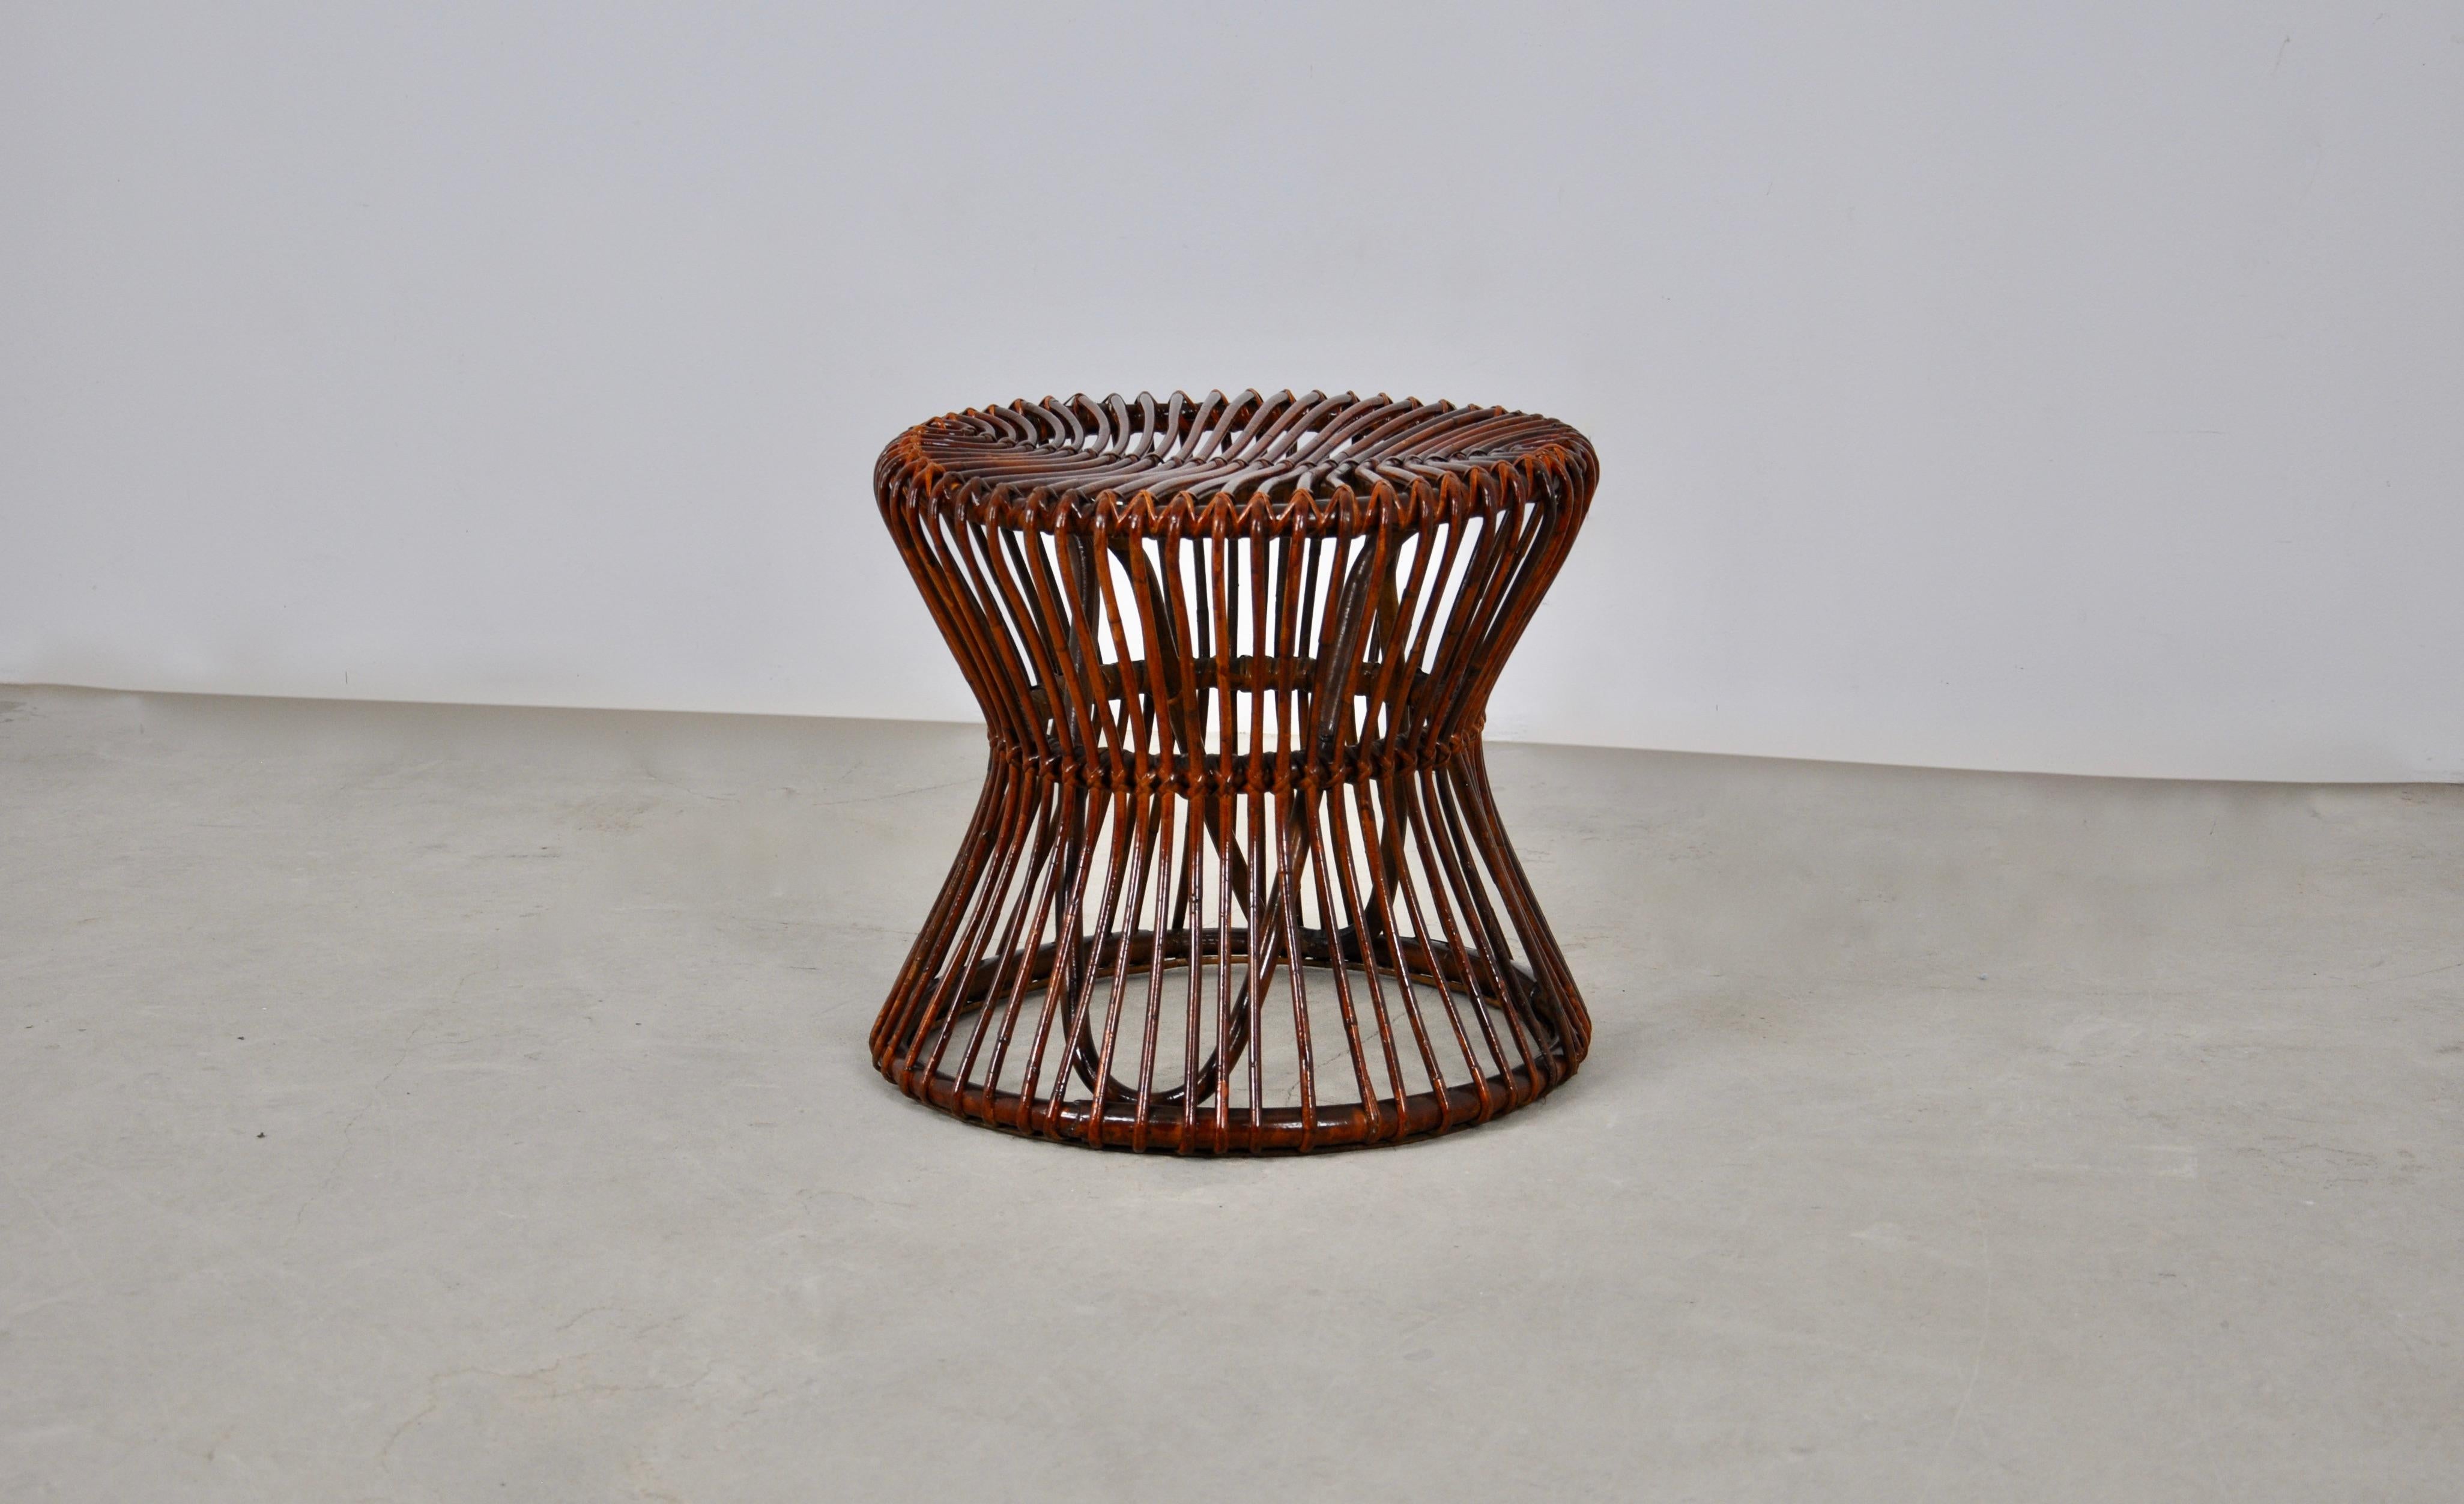 Italian rattan stool, Wear due to time and age of the stool.